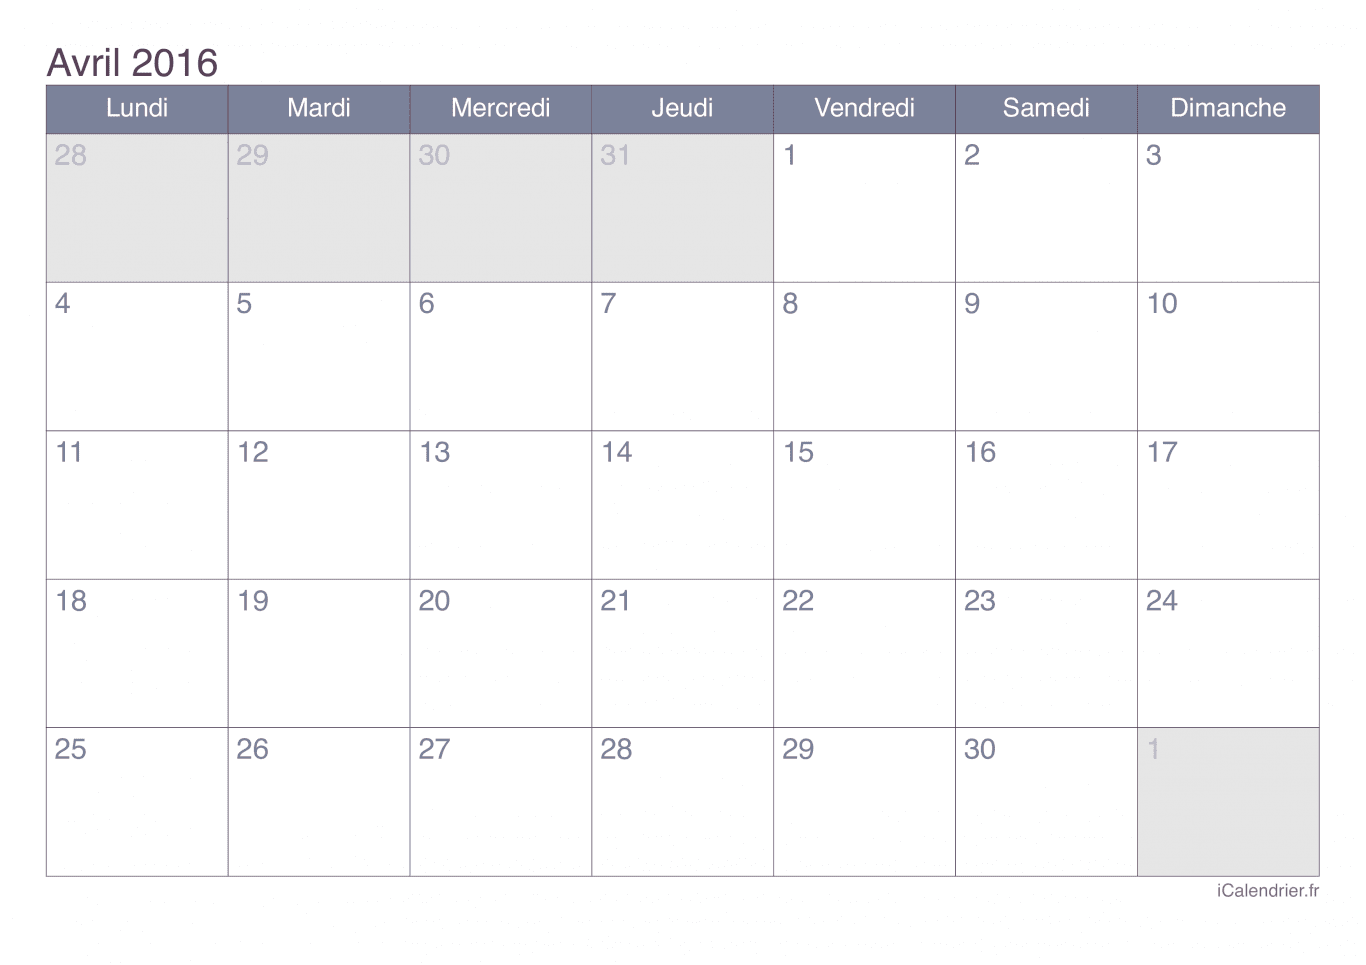 Calendrier d'avril 2016 - Office